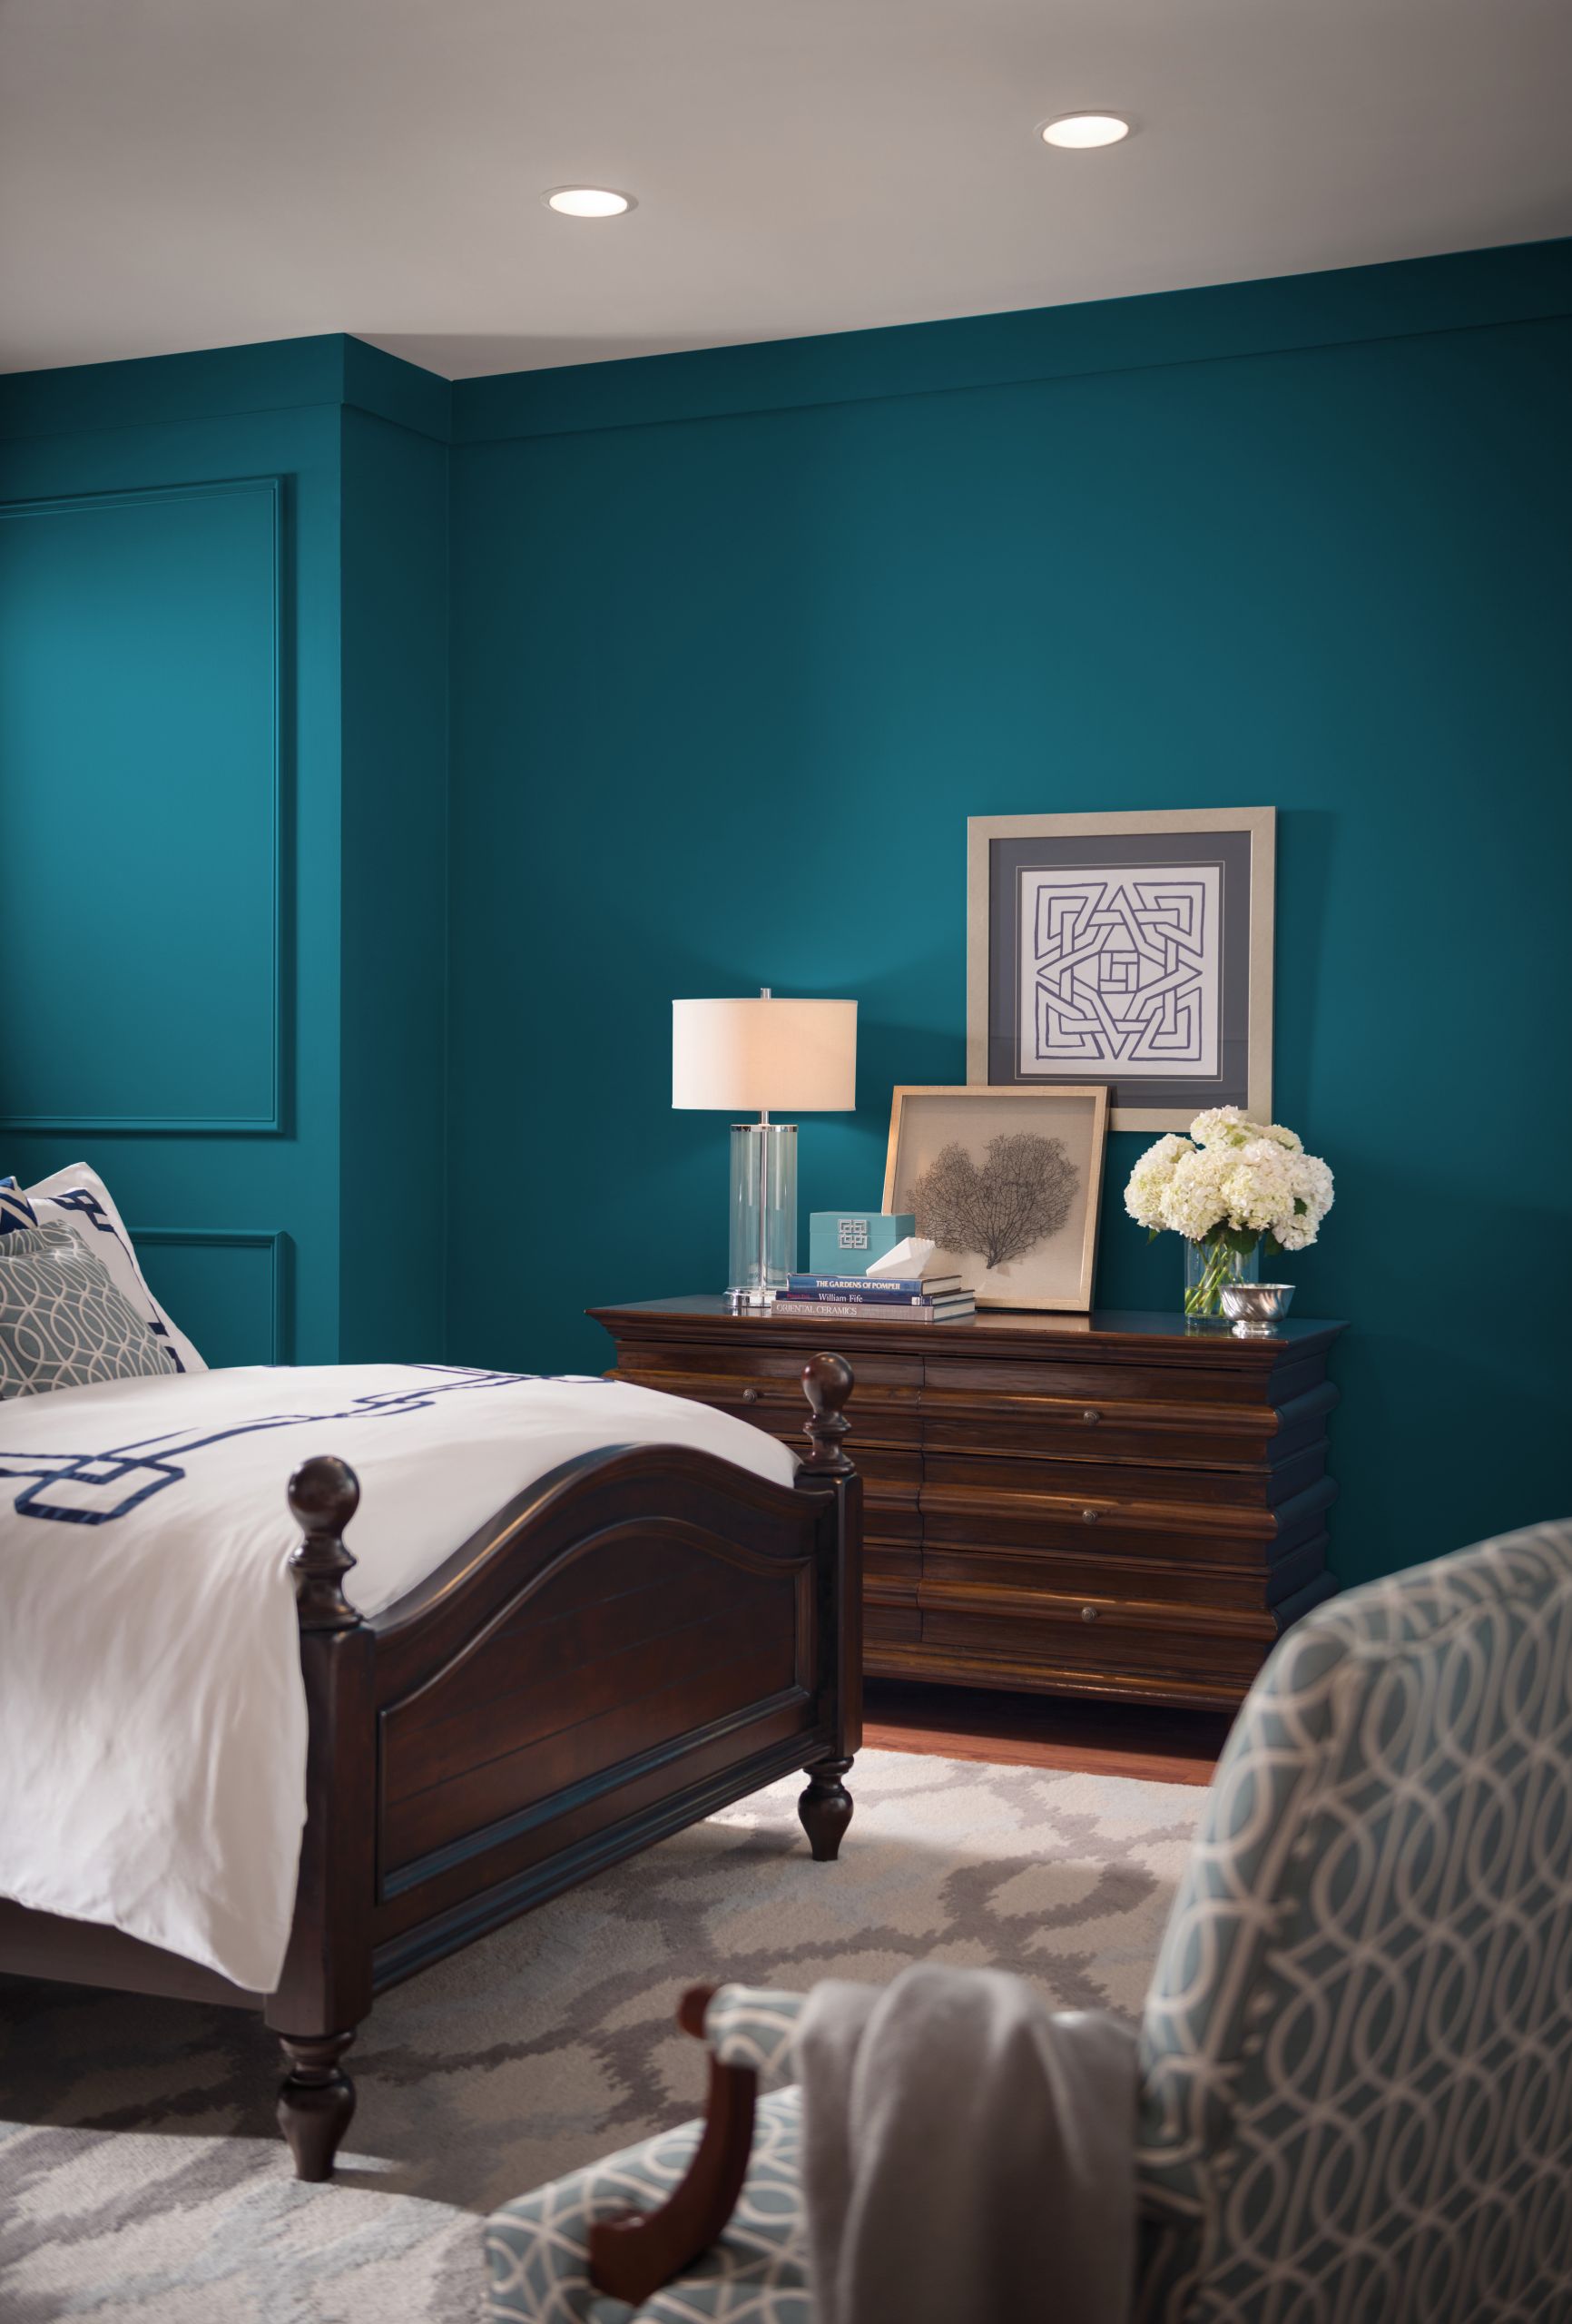 Sherwin Williams Bedroom Colors
 Sherwin Williams 2018 Color of the Year Oceanside